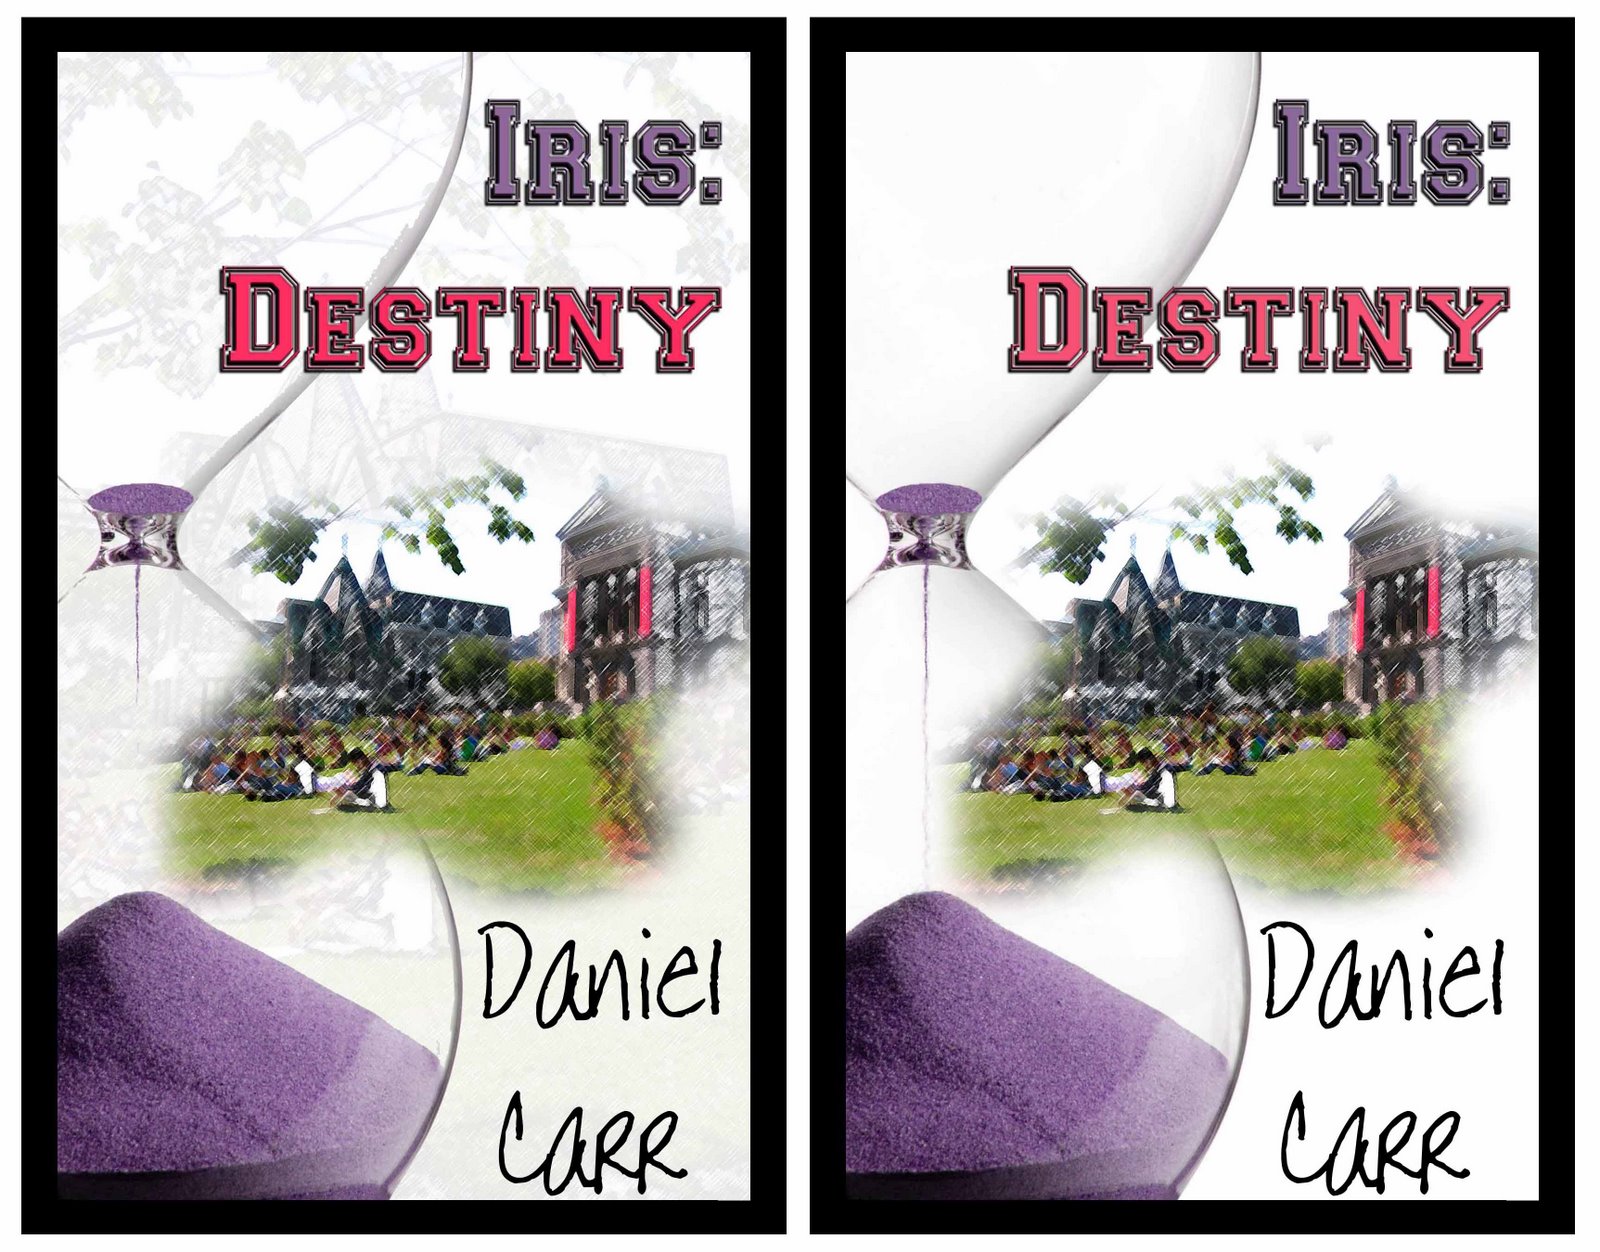 [Iris+Destiny+front+cover+confussion+for+blogs.jpg]